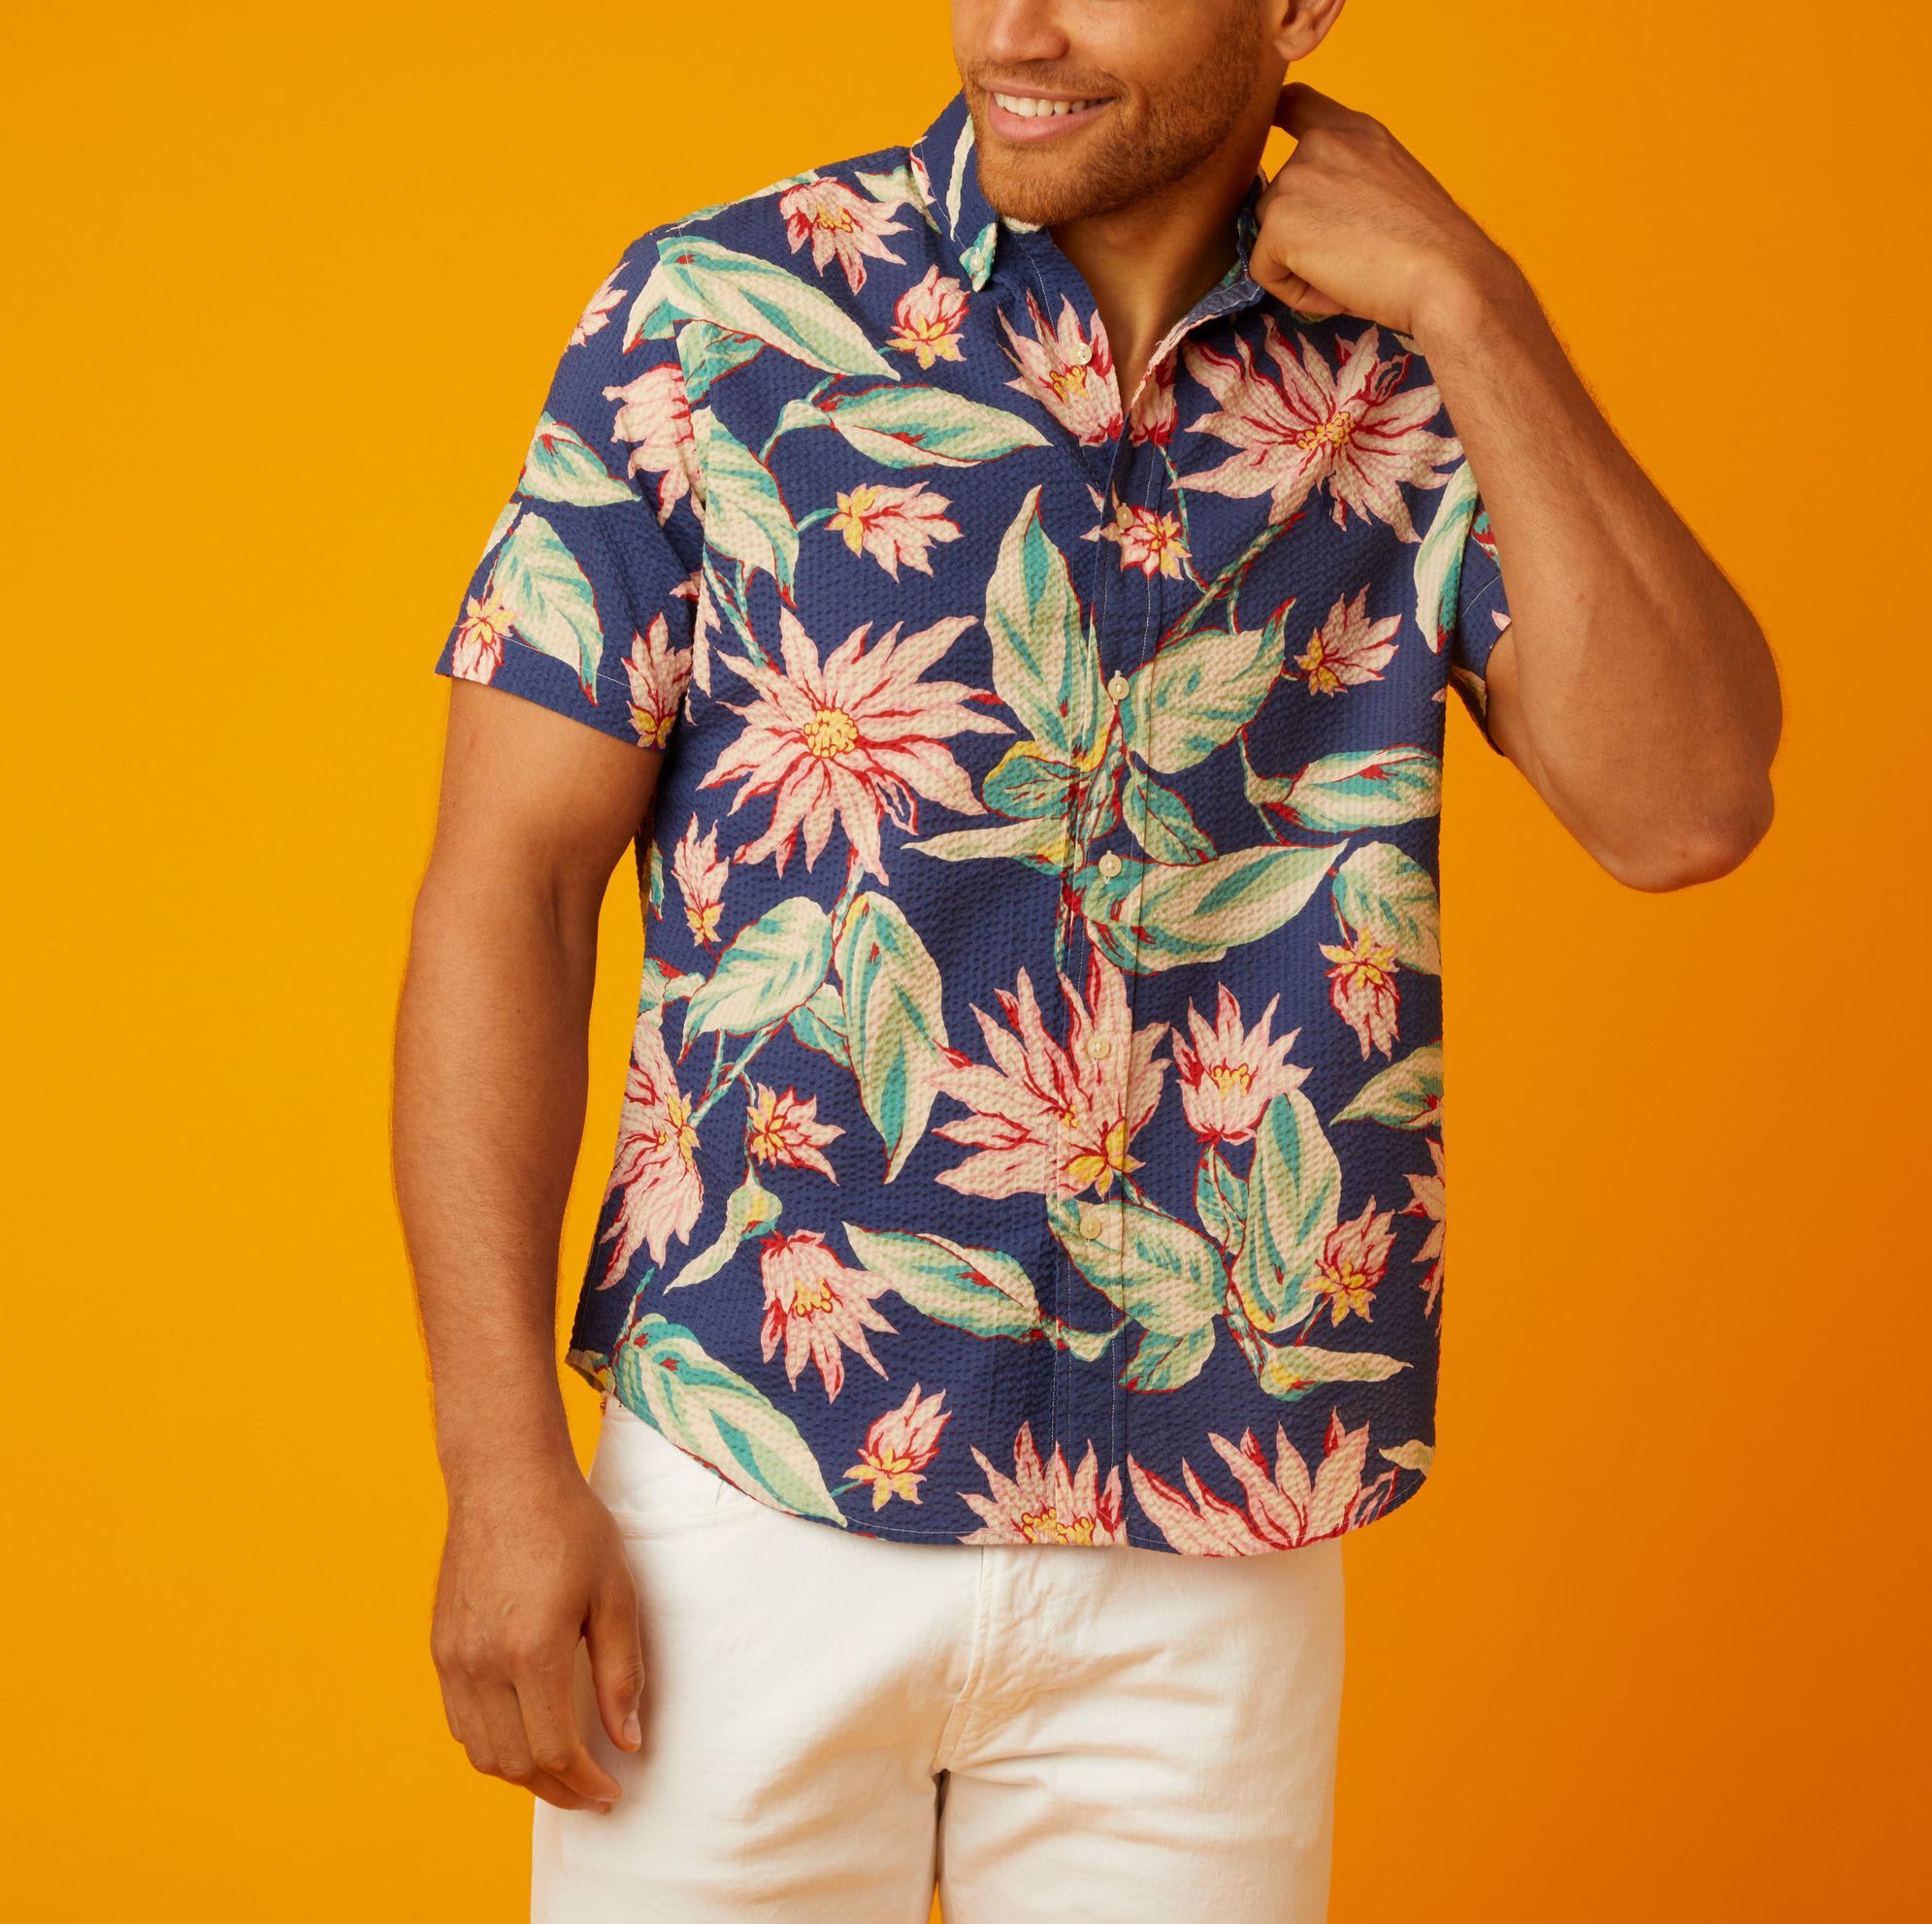 Get on Your Hawaiian Shirt Game With Our 14 Editor-Approved Favorites